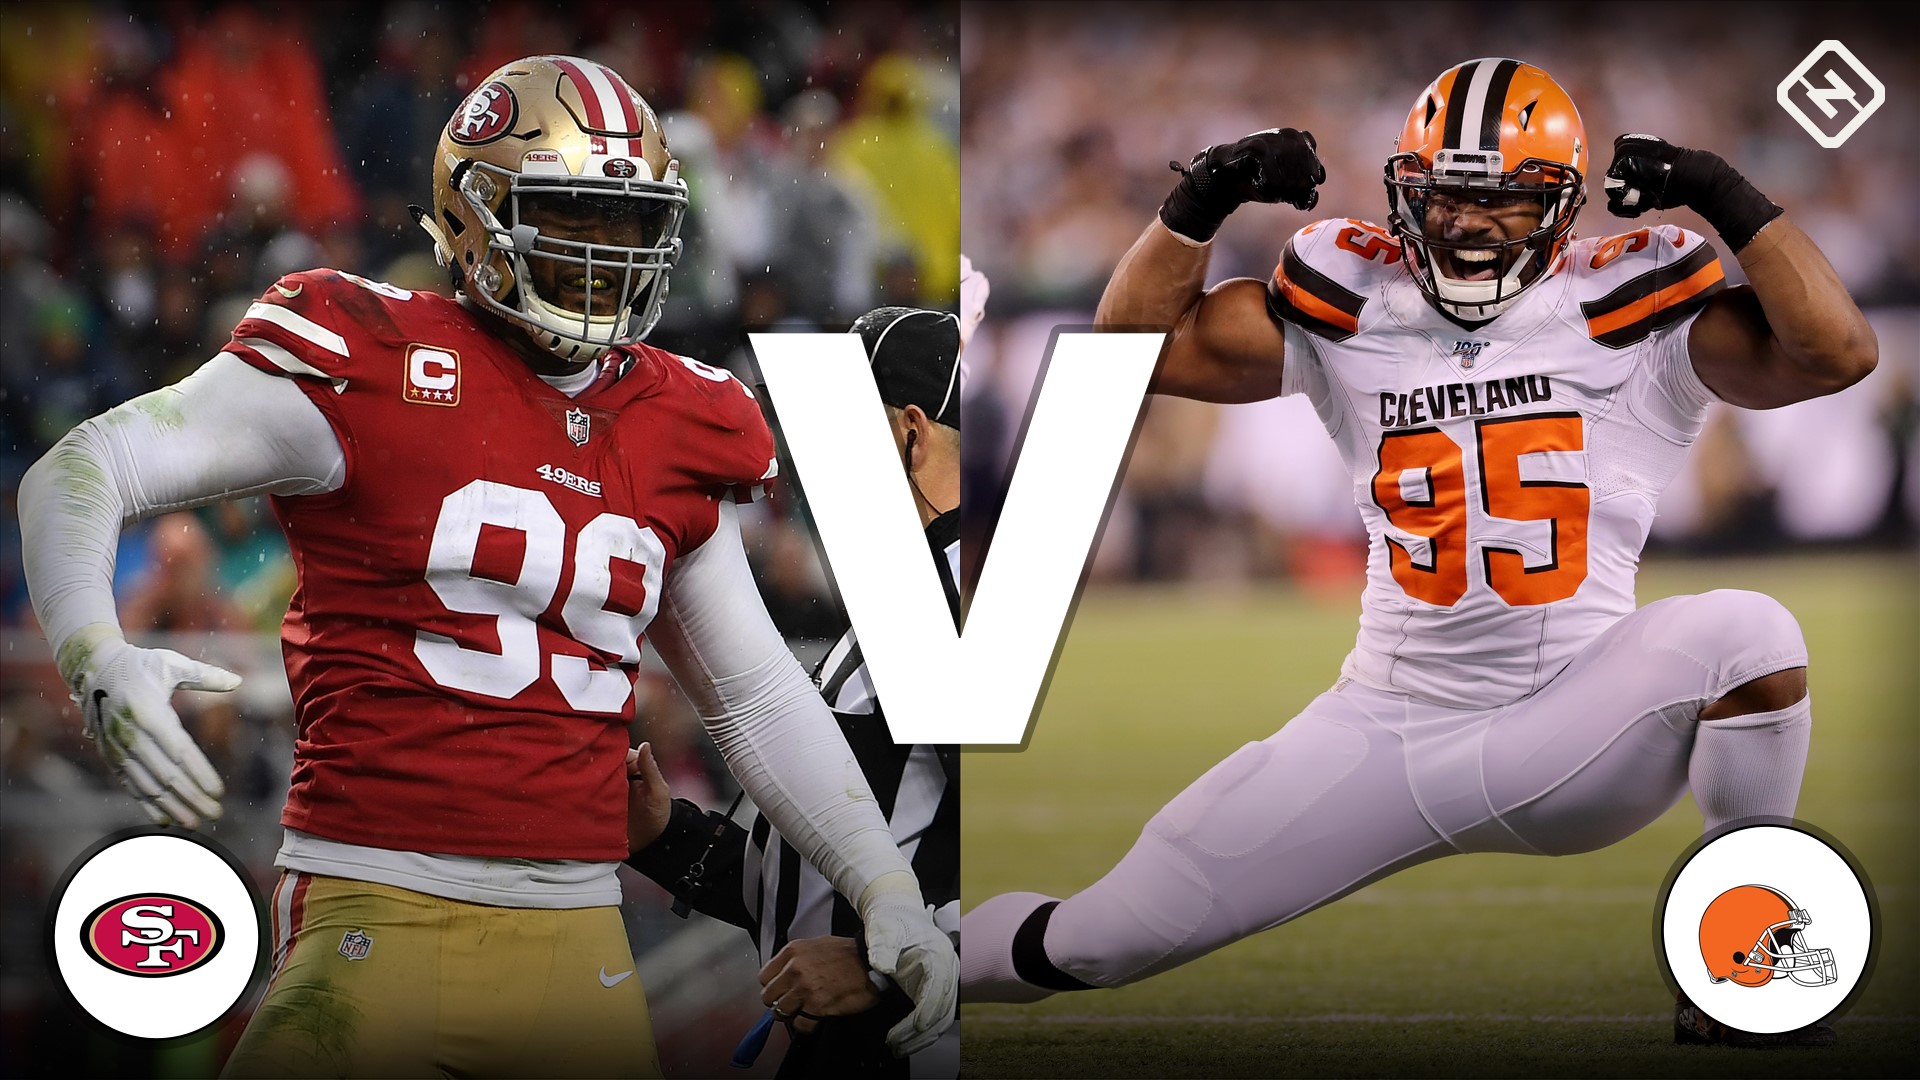 Flipboard Browns vs. 49ers Live score, updates, highlights from